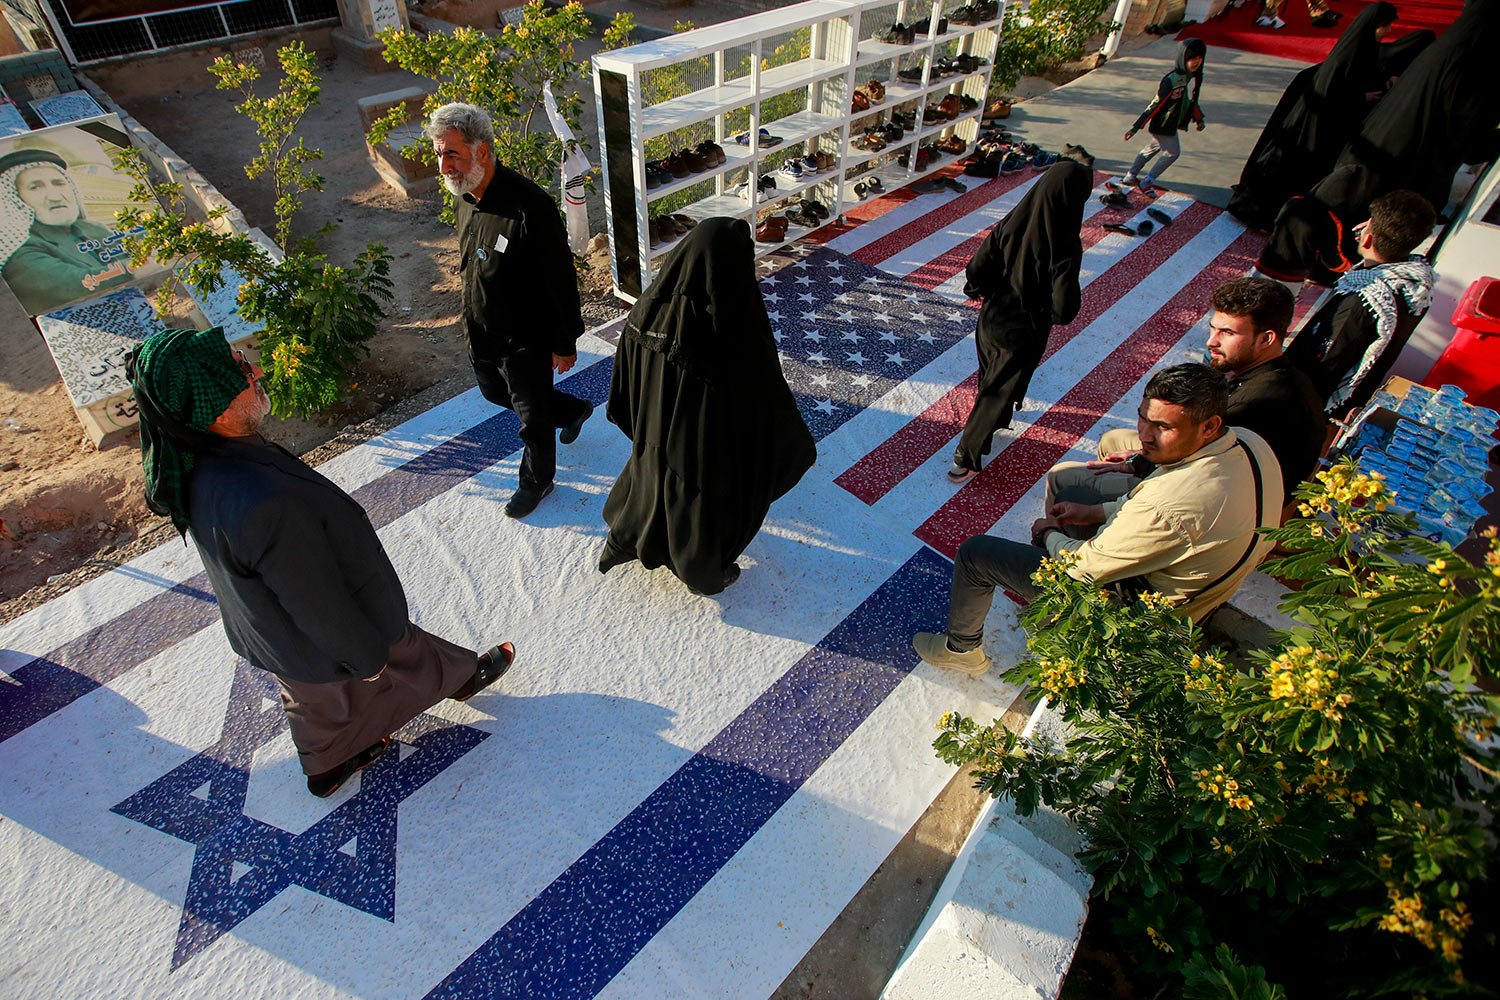  People walk walk over Israeli and American flags during a third anniversary assassination of Abu Mahdi al-Muhandis, deputy commander of Iran-backed militias in Iraq known as the Popular Mobilization Forces and Iran's top general Qassam Soleimani at 